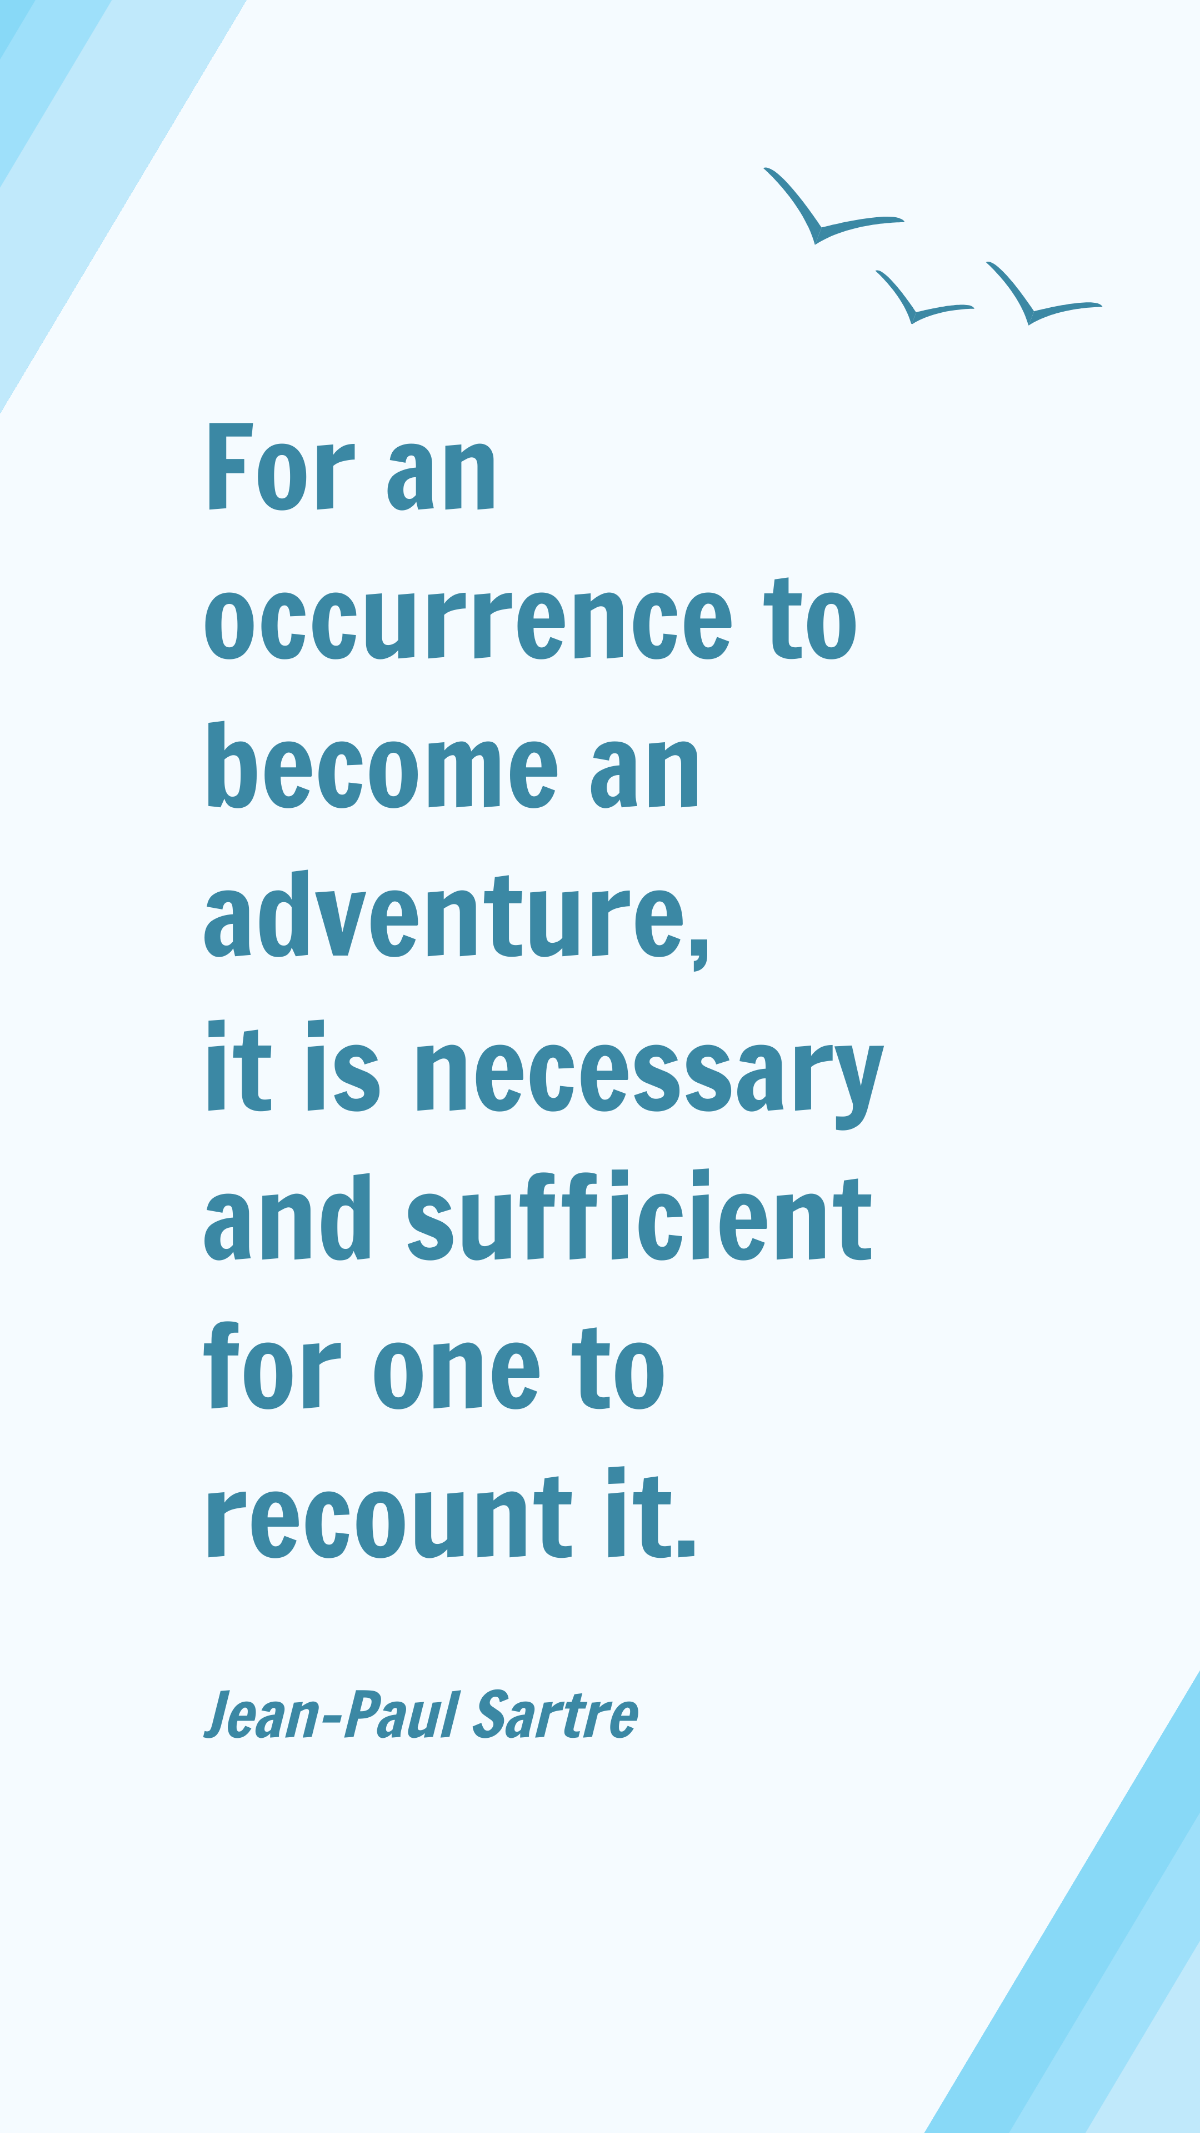 Jean-Paul Sartre - For an occurrence to become an adventure, it is necessary and sufficient for one to recount it.